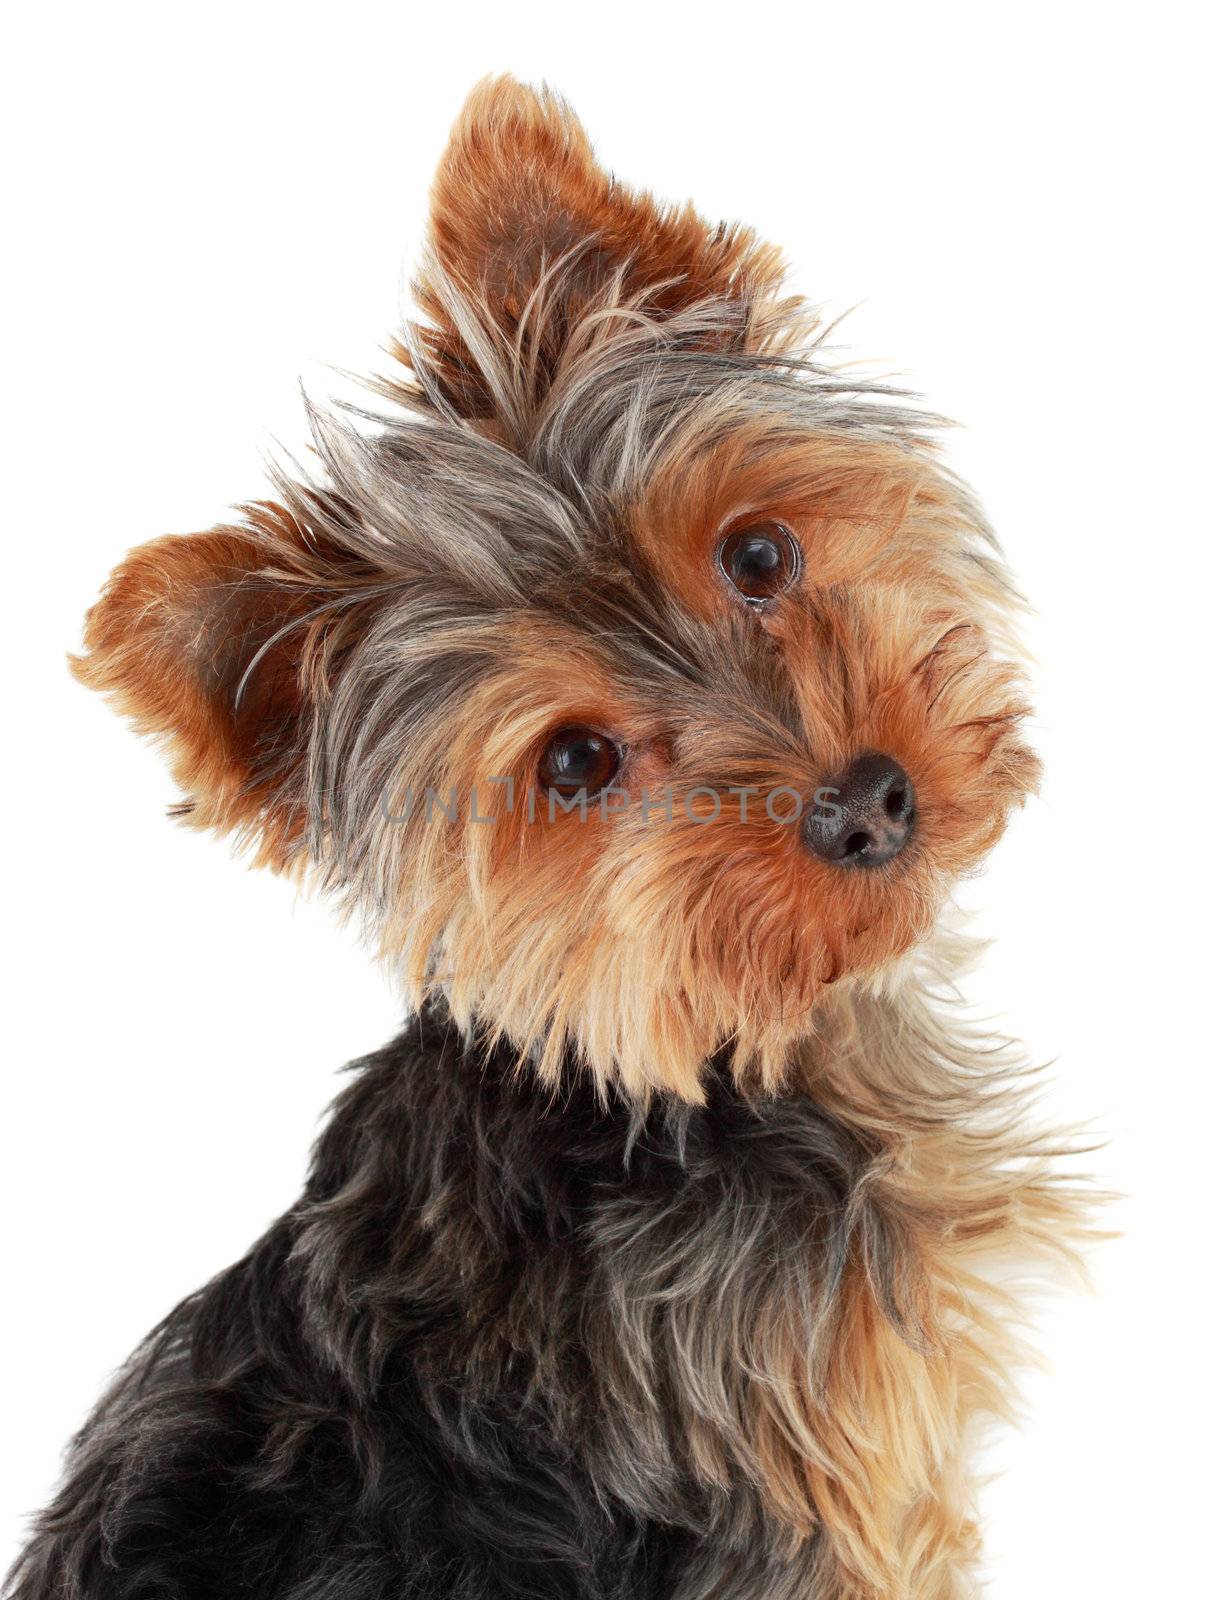 Cute Yorkie puppy by lanalanglois